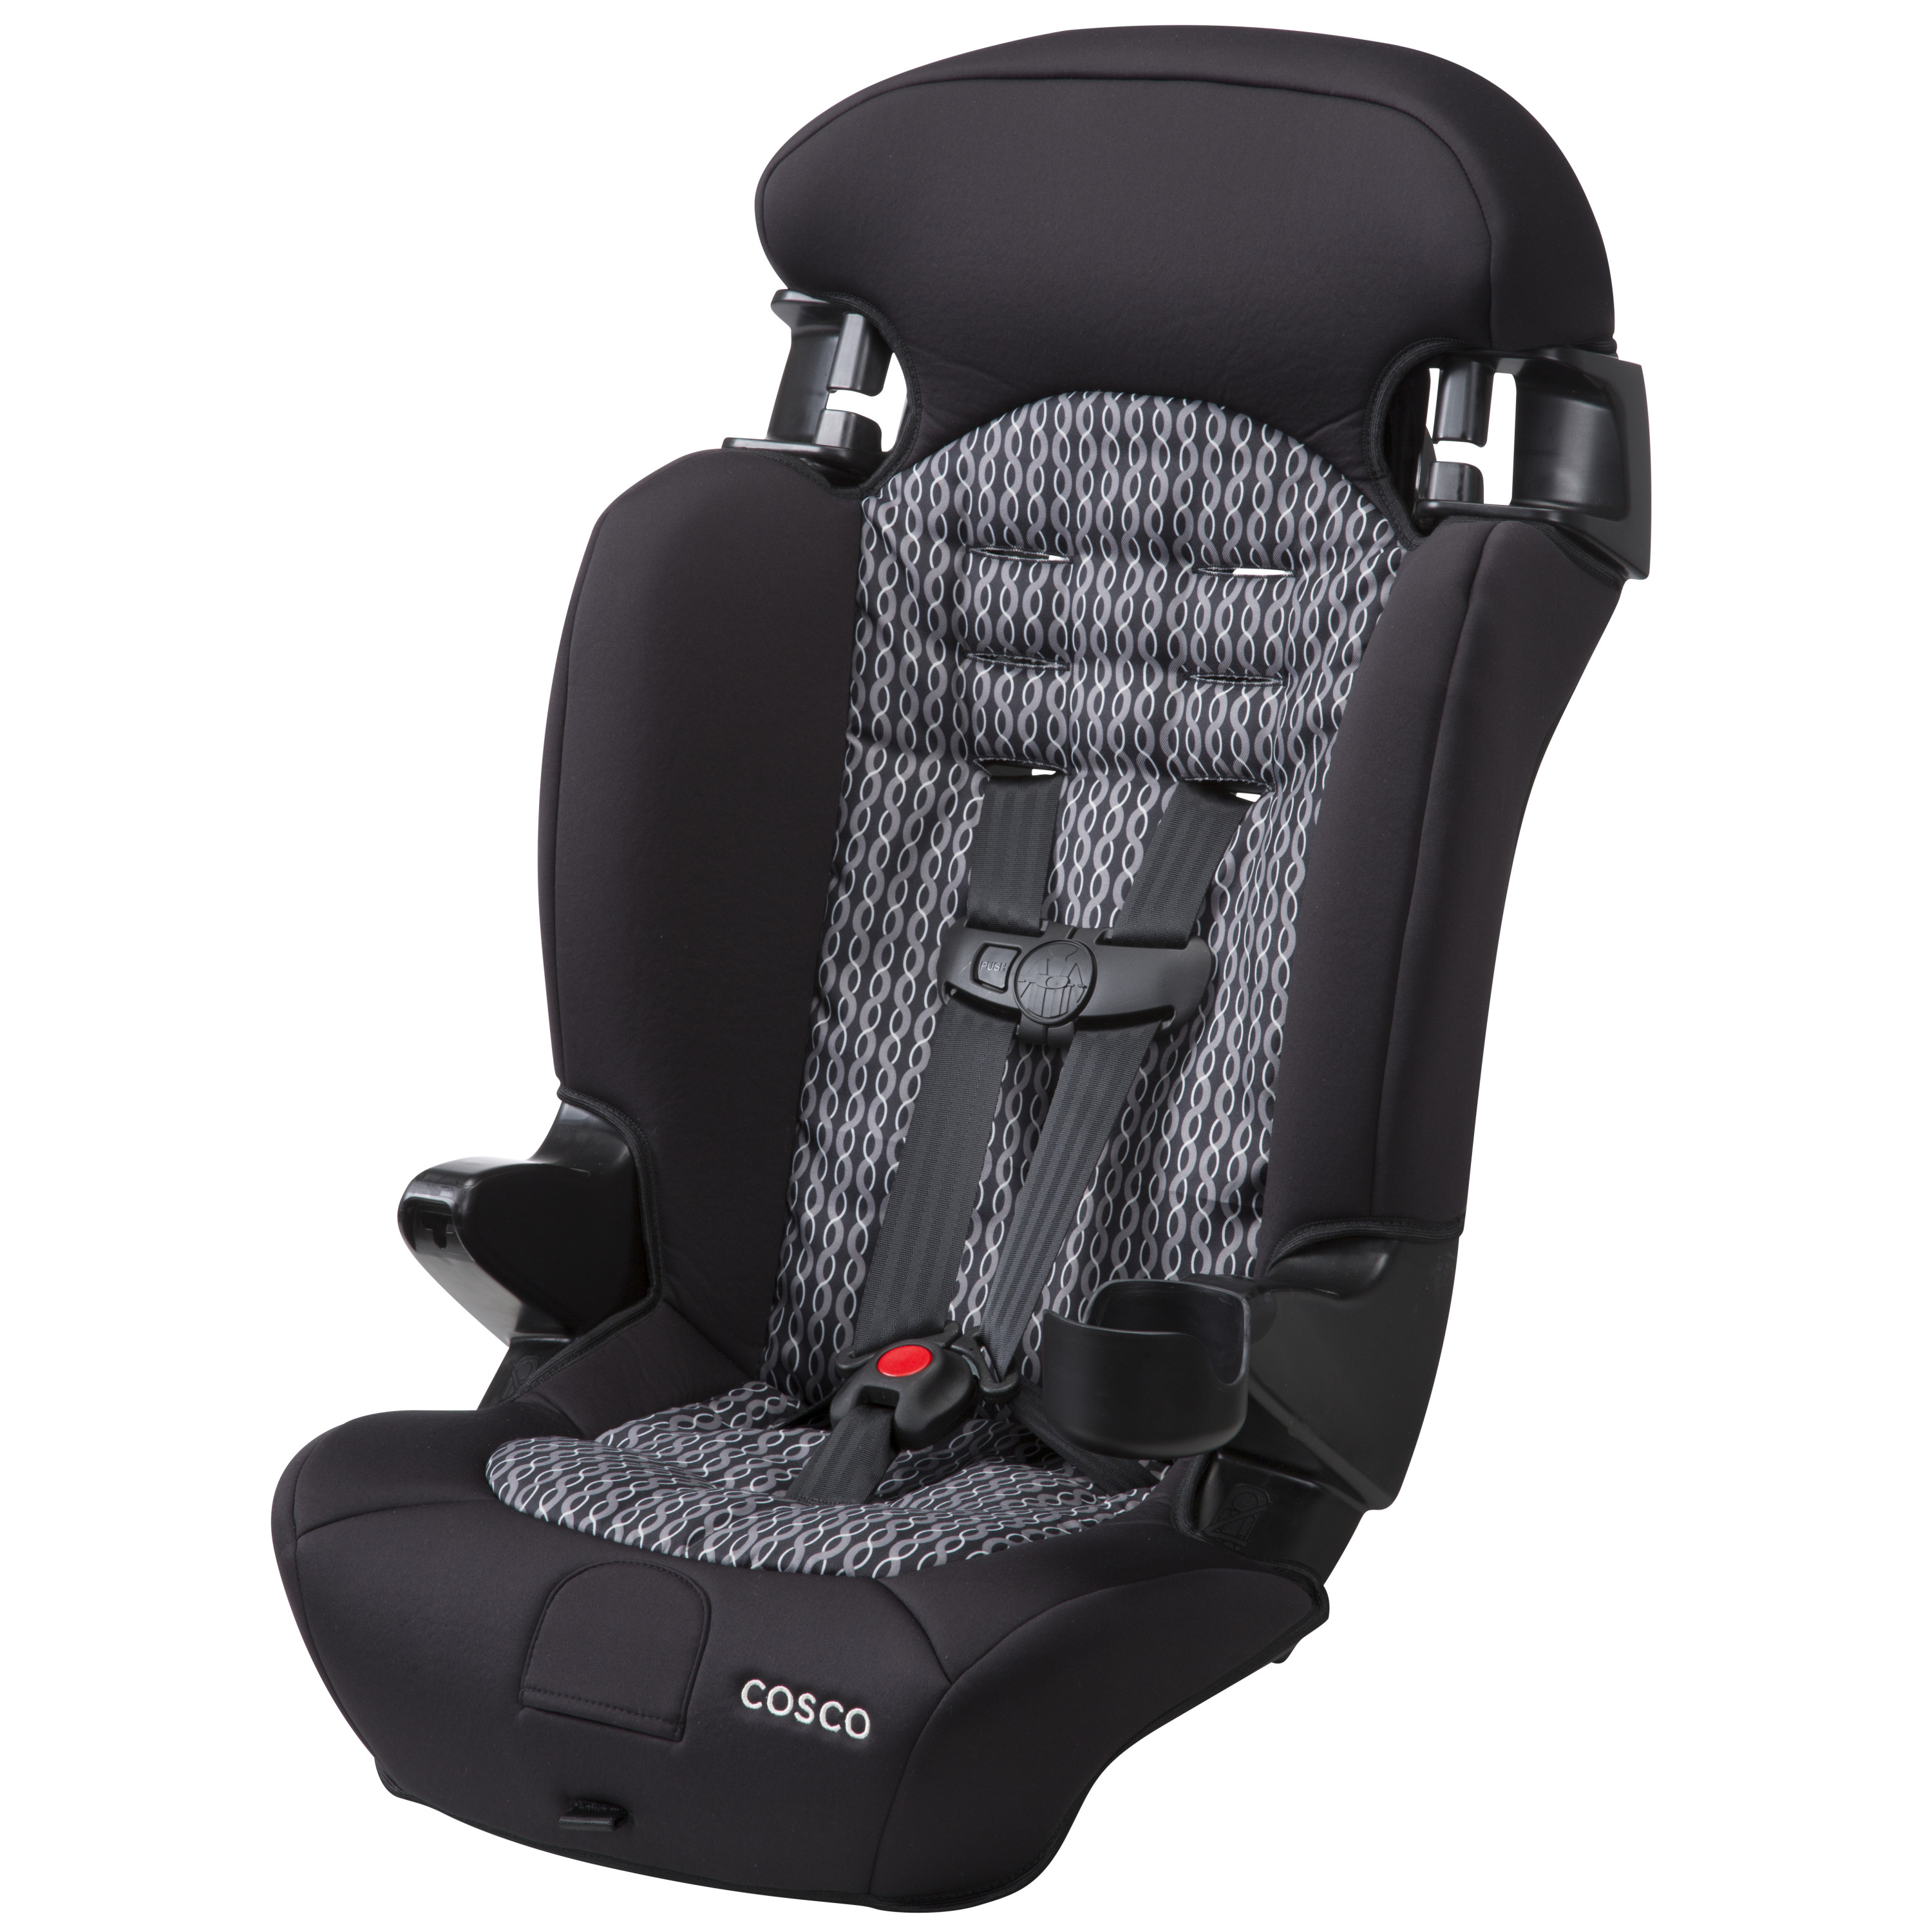 Cosco Kids Finale 2-in-1 Booster Car Seat, Braided Twine - image 1 of 17